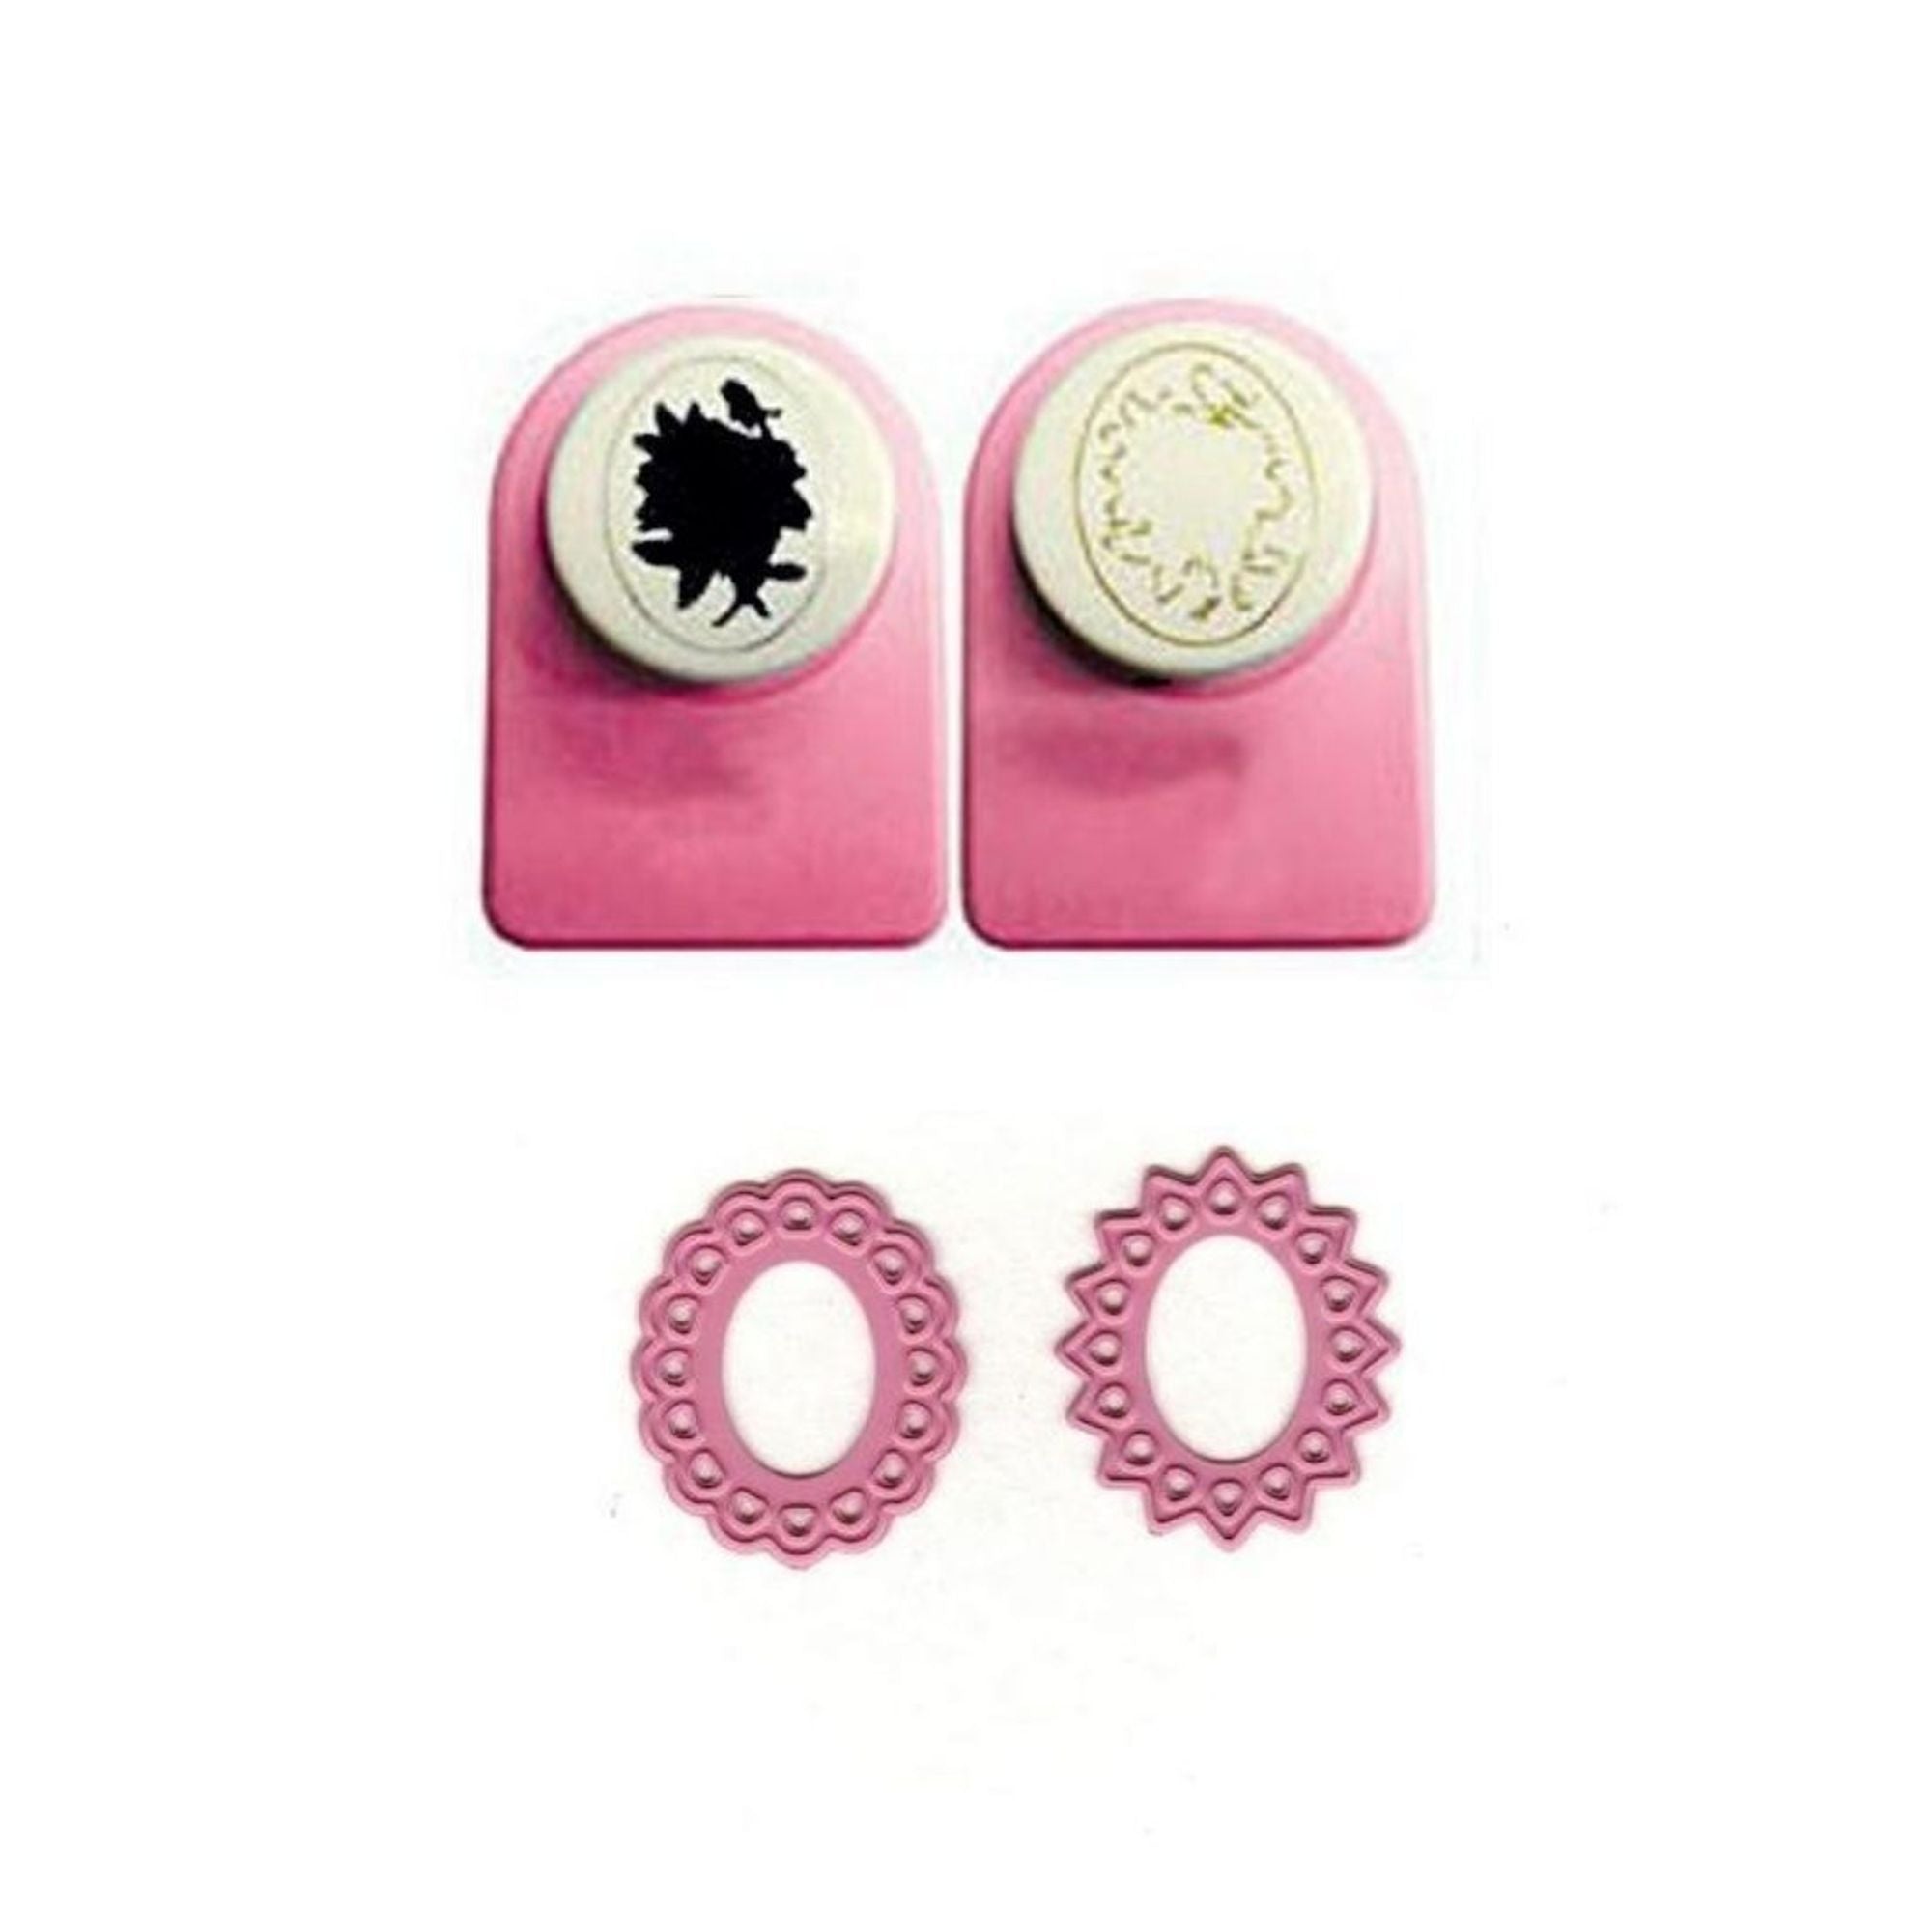 "SMALL" CAMEO PUNCH & DIE SET - Vintage Flower